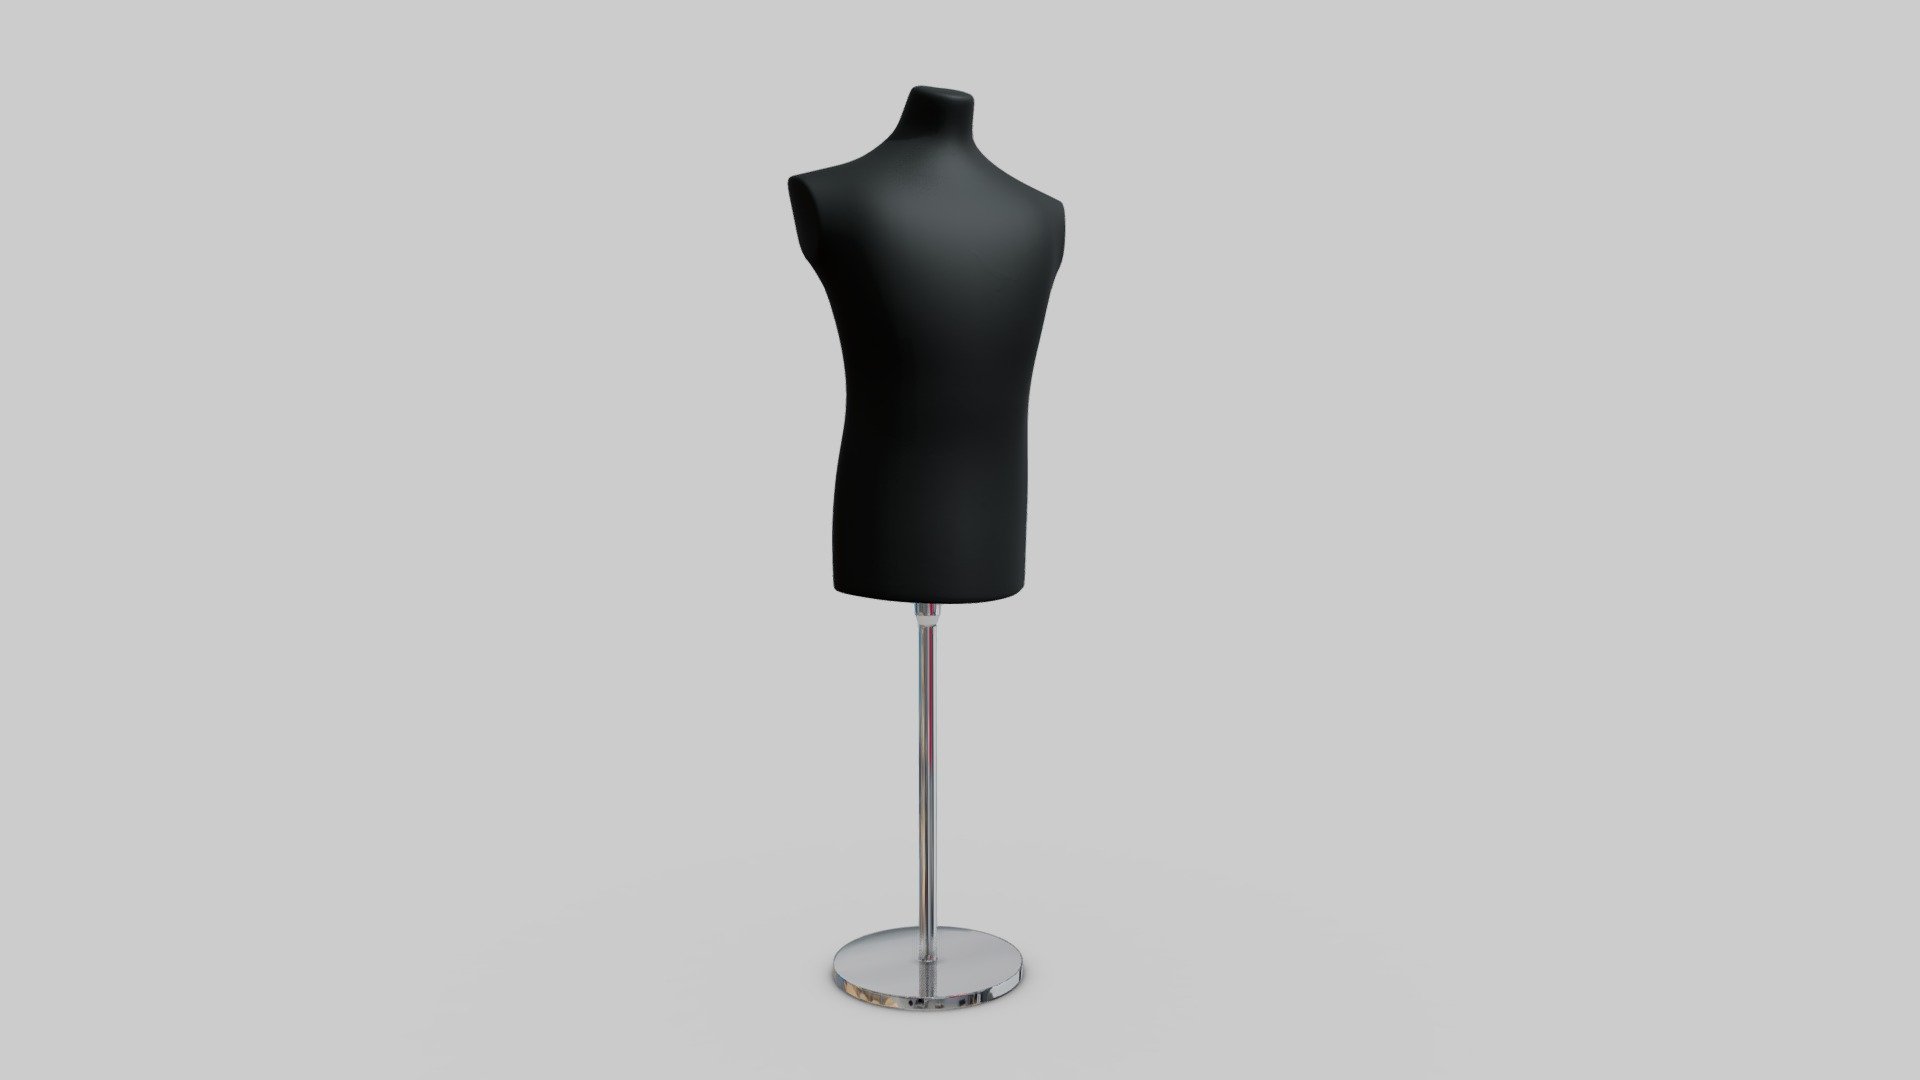 Tailor mannequin, if you need a different project, contact me

3d Modeling: Marcin Lubecki. 

See more of our work on: https://www.behance.net/marcinlubecki



Check out my patreone benefits :Patreon

If you need personalized 3d models or got any questions to us or just need to talk, feel free to contact at: marcinlubecki@gmail.com

Published by 3ds Max - Tailor's mannequin - Buy Royalty Free 3D model by Marcin Lubecki (@Lubus) 3d model